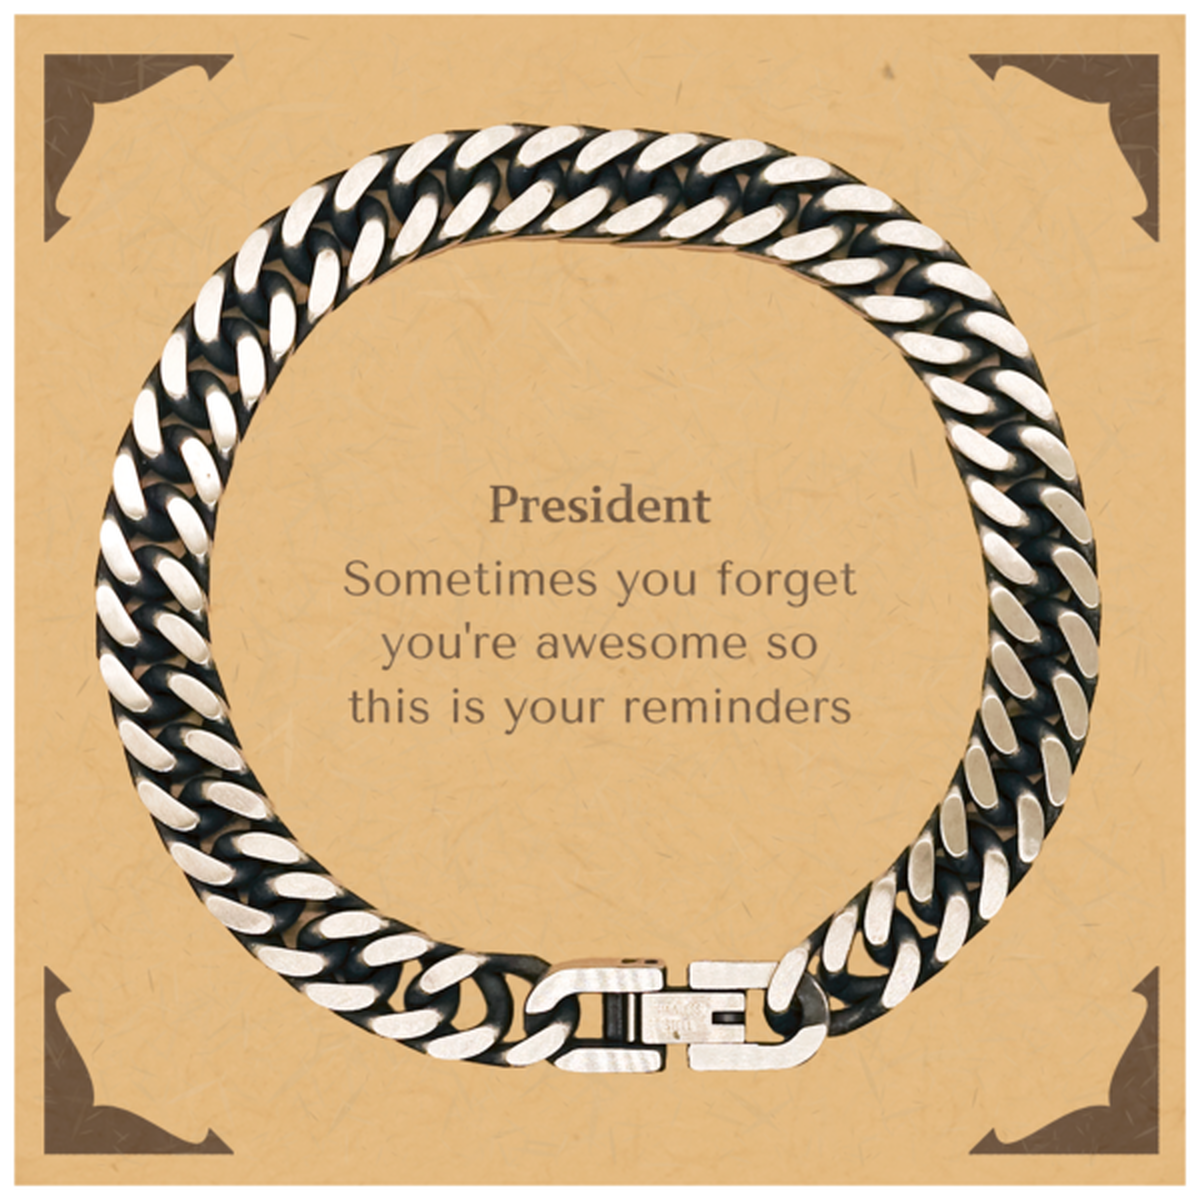 Sentimental President Cuban Link Chain Bracelet, President Sometimes you forget you're awesome so this is your reminders, Graduation Christmas Birthday Gifts for President, Men, Women, Coworkers